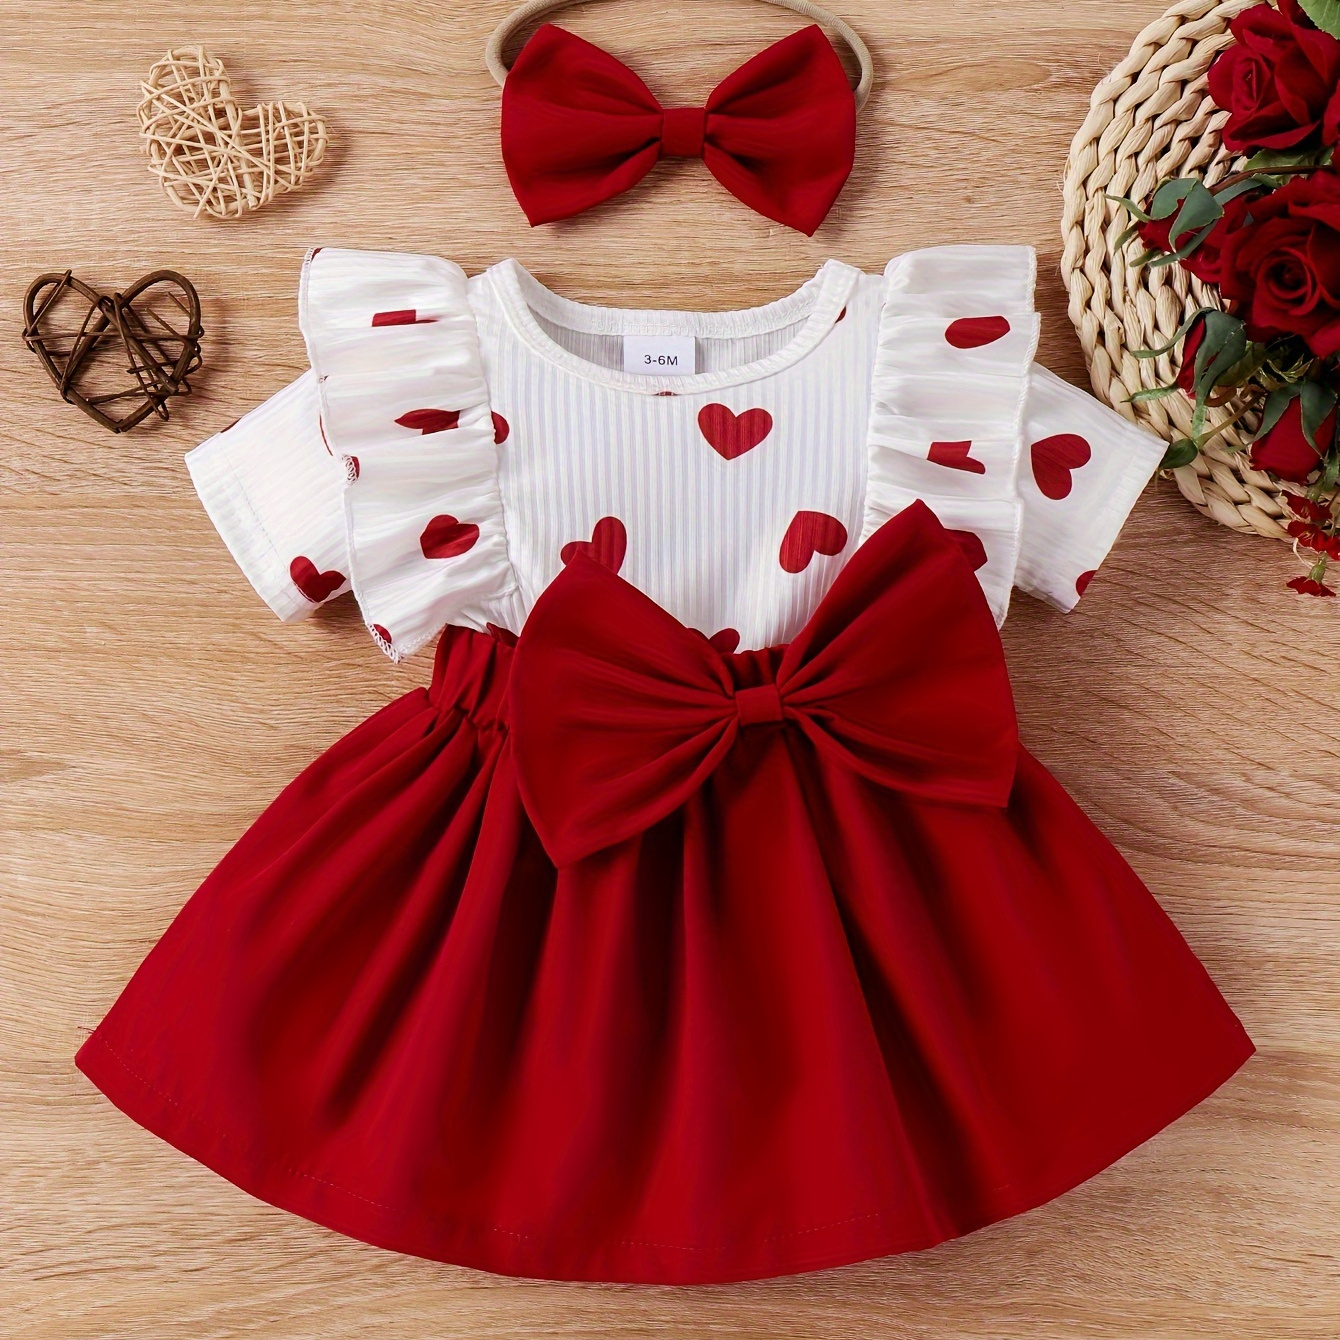 

Baby's Cute Bowknot Decor Heart Pattern Dress, Ruffle Decor Ribbed Short Sleeve Dress, Infant & Toddler Girl's Clothing For Summer/spring, As Gift